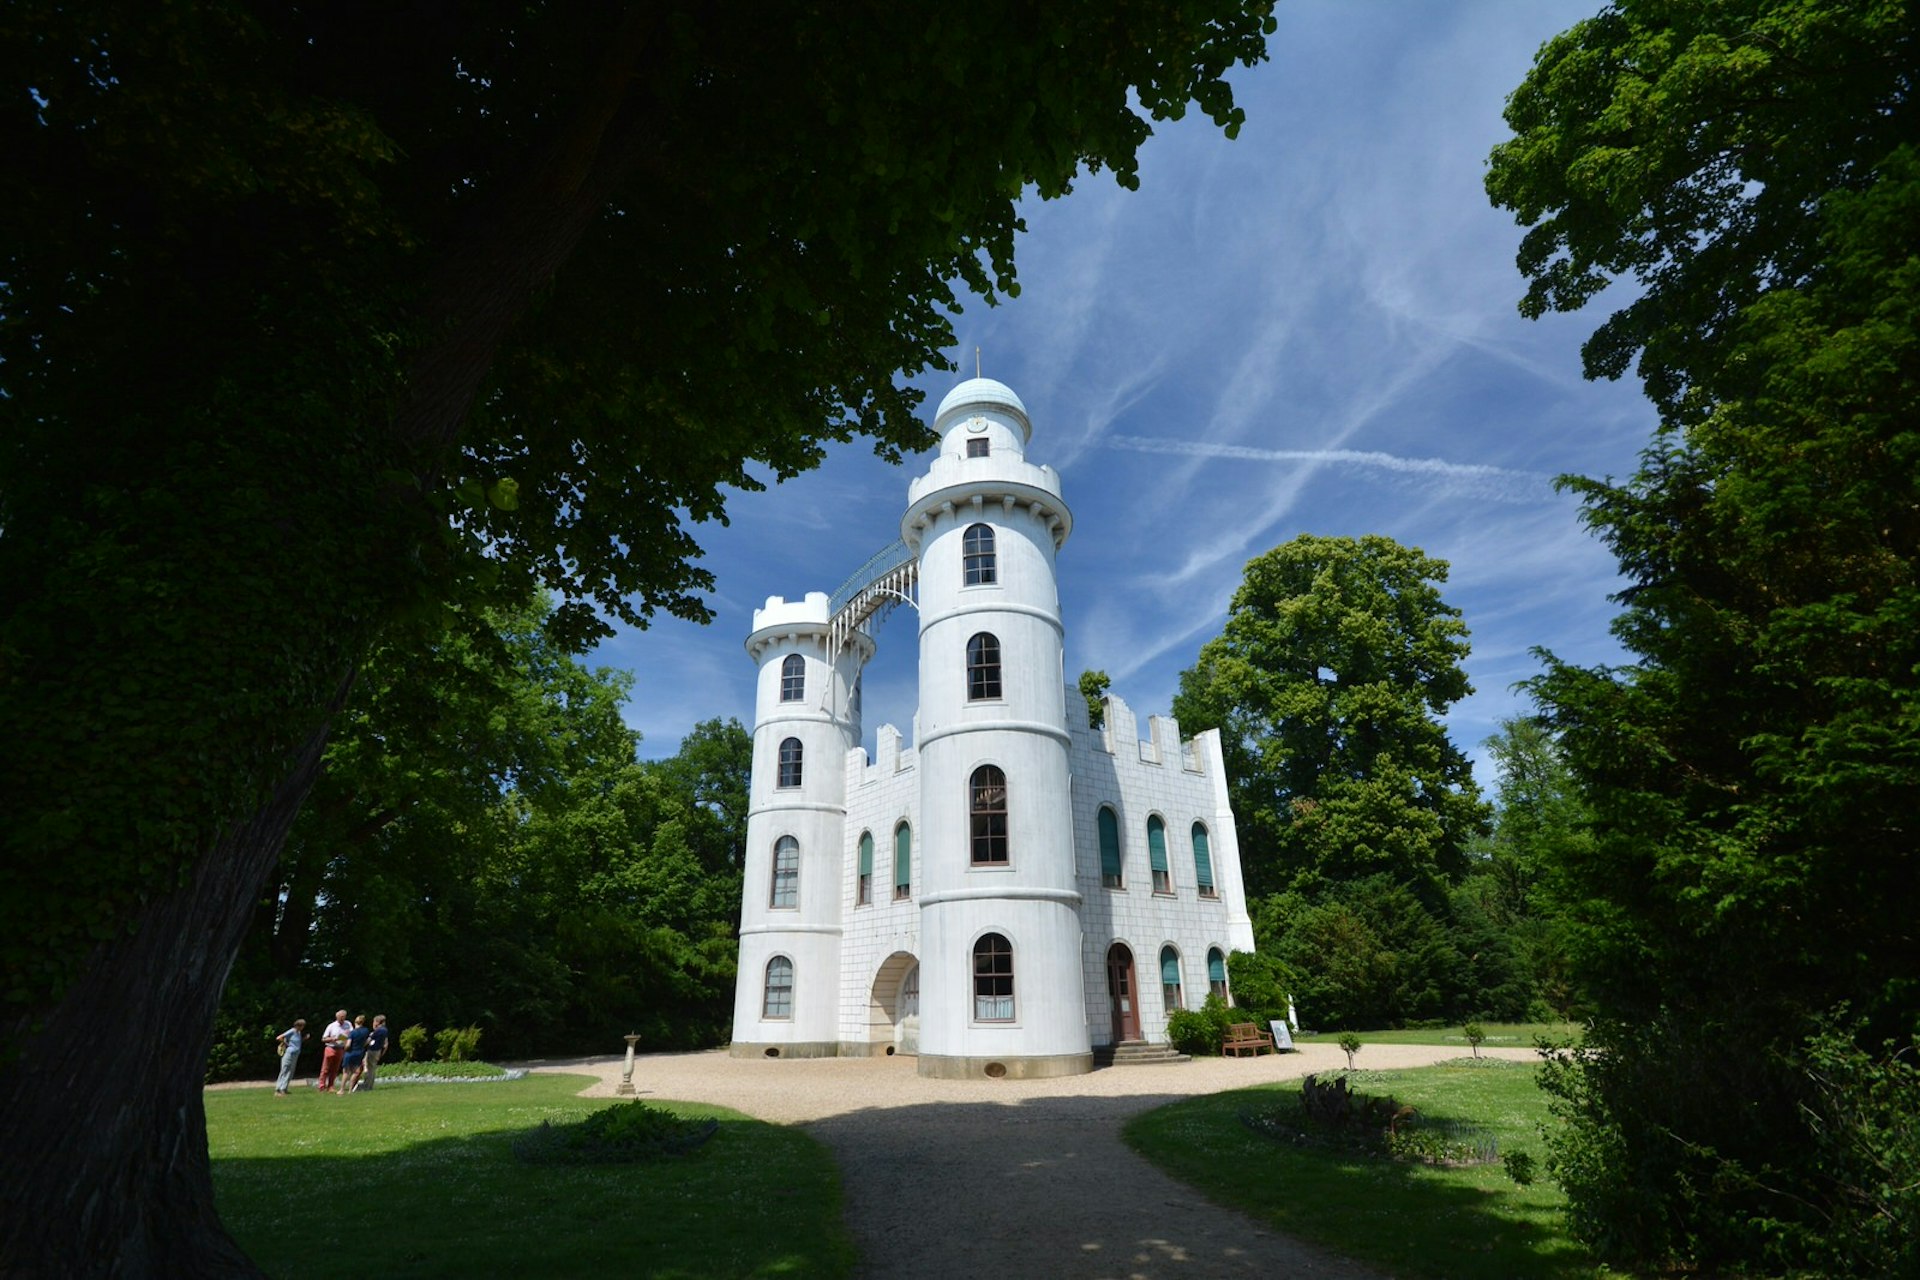 Berlin day trips - Pfaueninsel Palace on Pfaueninsel, which means 'Peacock Island' in German. The palace is white with two turrets and sits amid leafy green trees against a clear blue sky